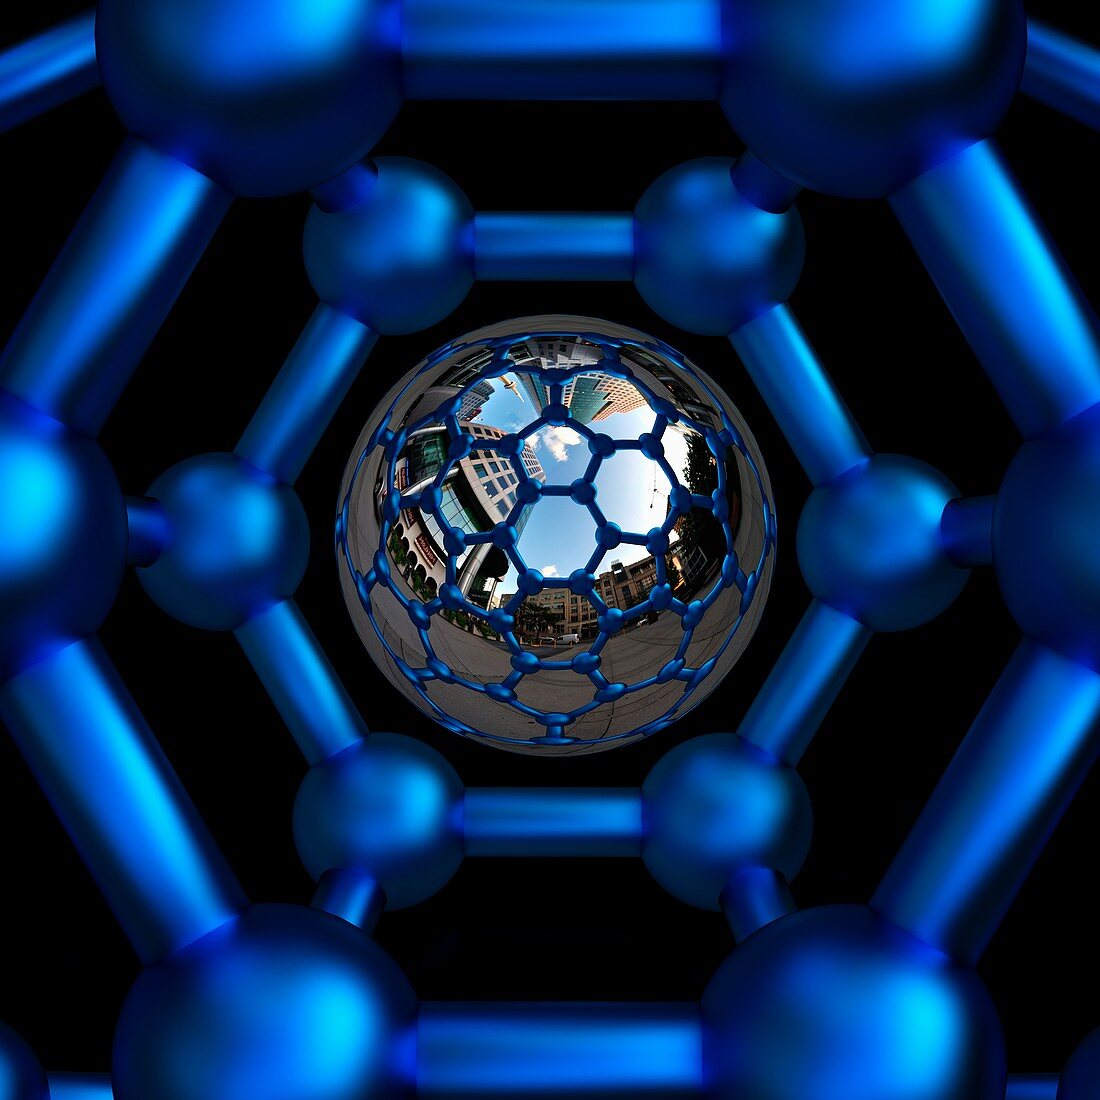 Buckyball C60 inside with central sphere, illustration